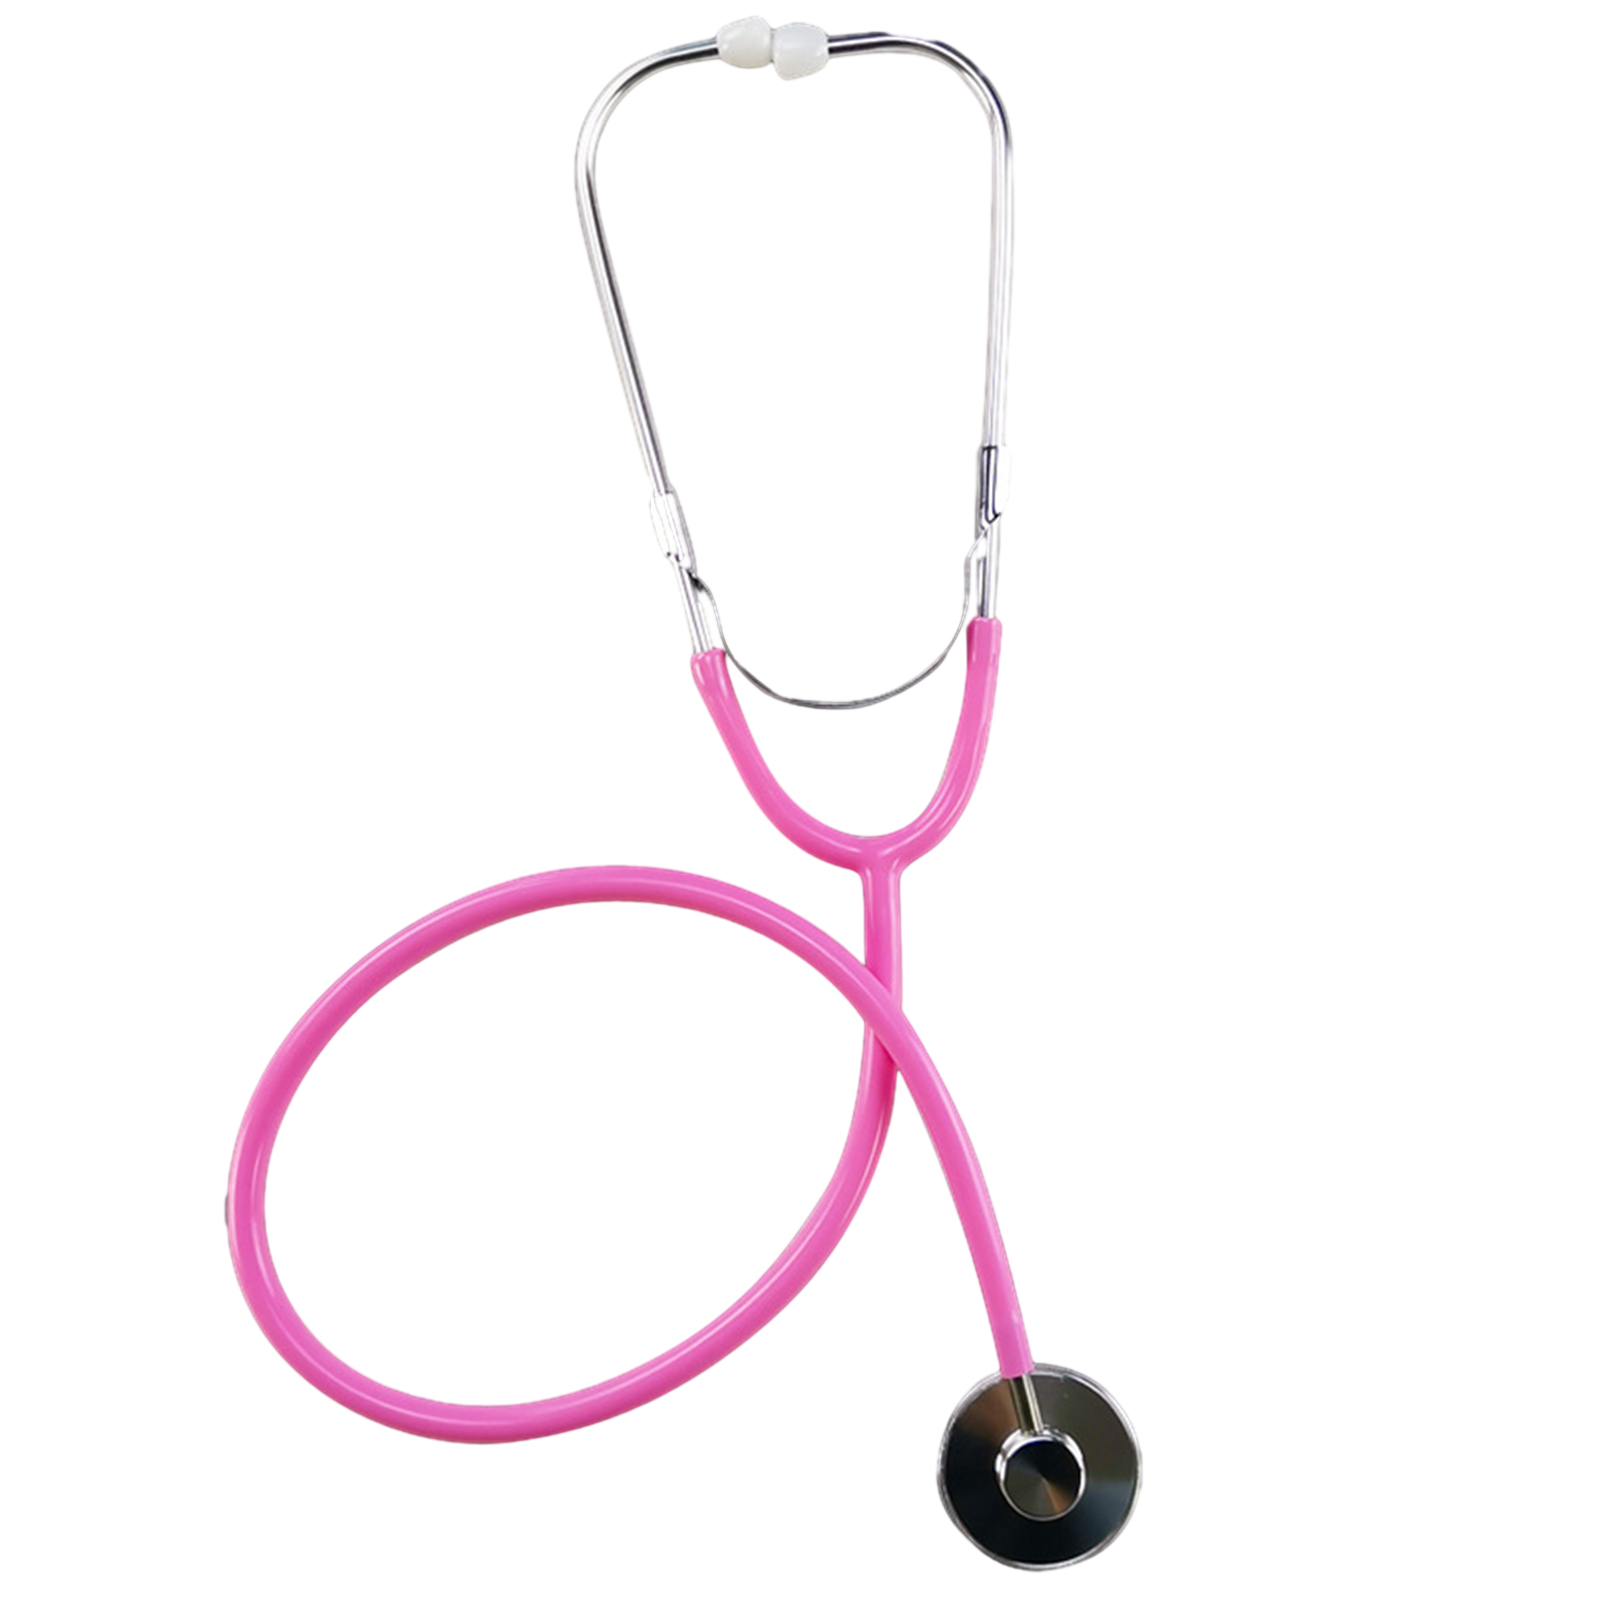 218s Stethoscope Toy for Kids Toy Stethoscope with Durable Materials Kid s